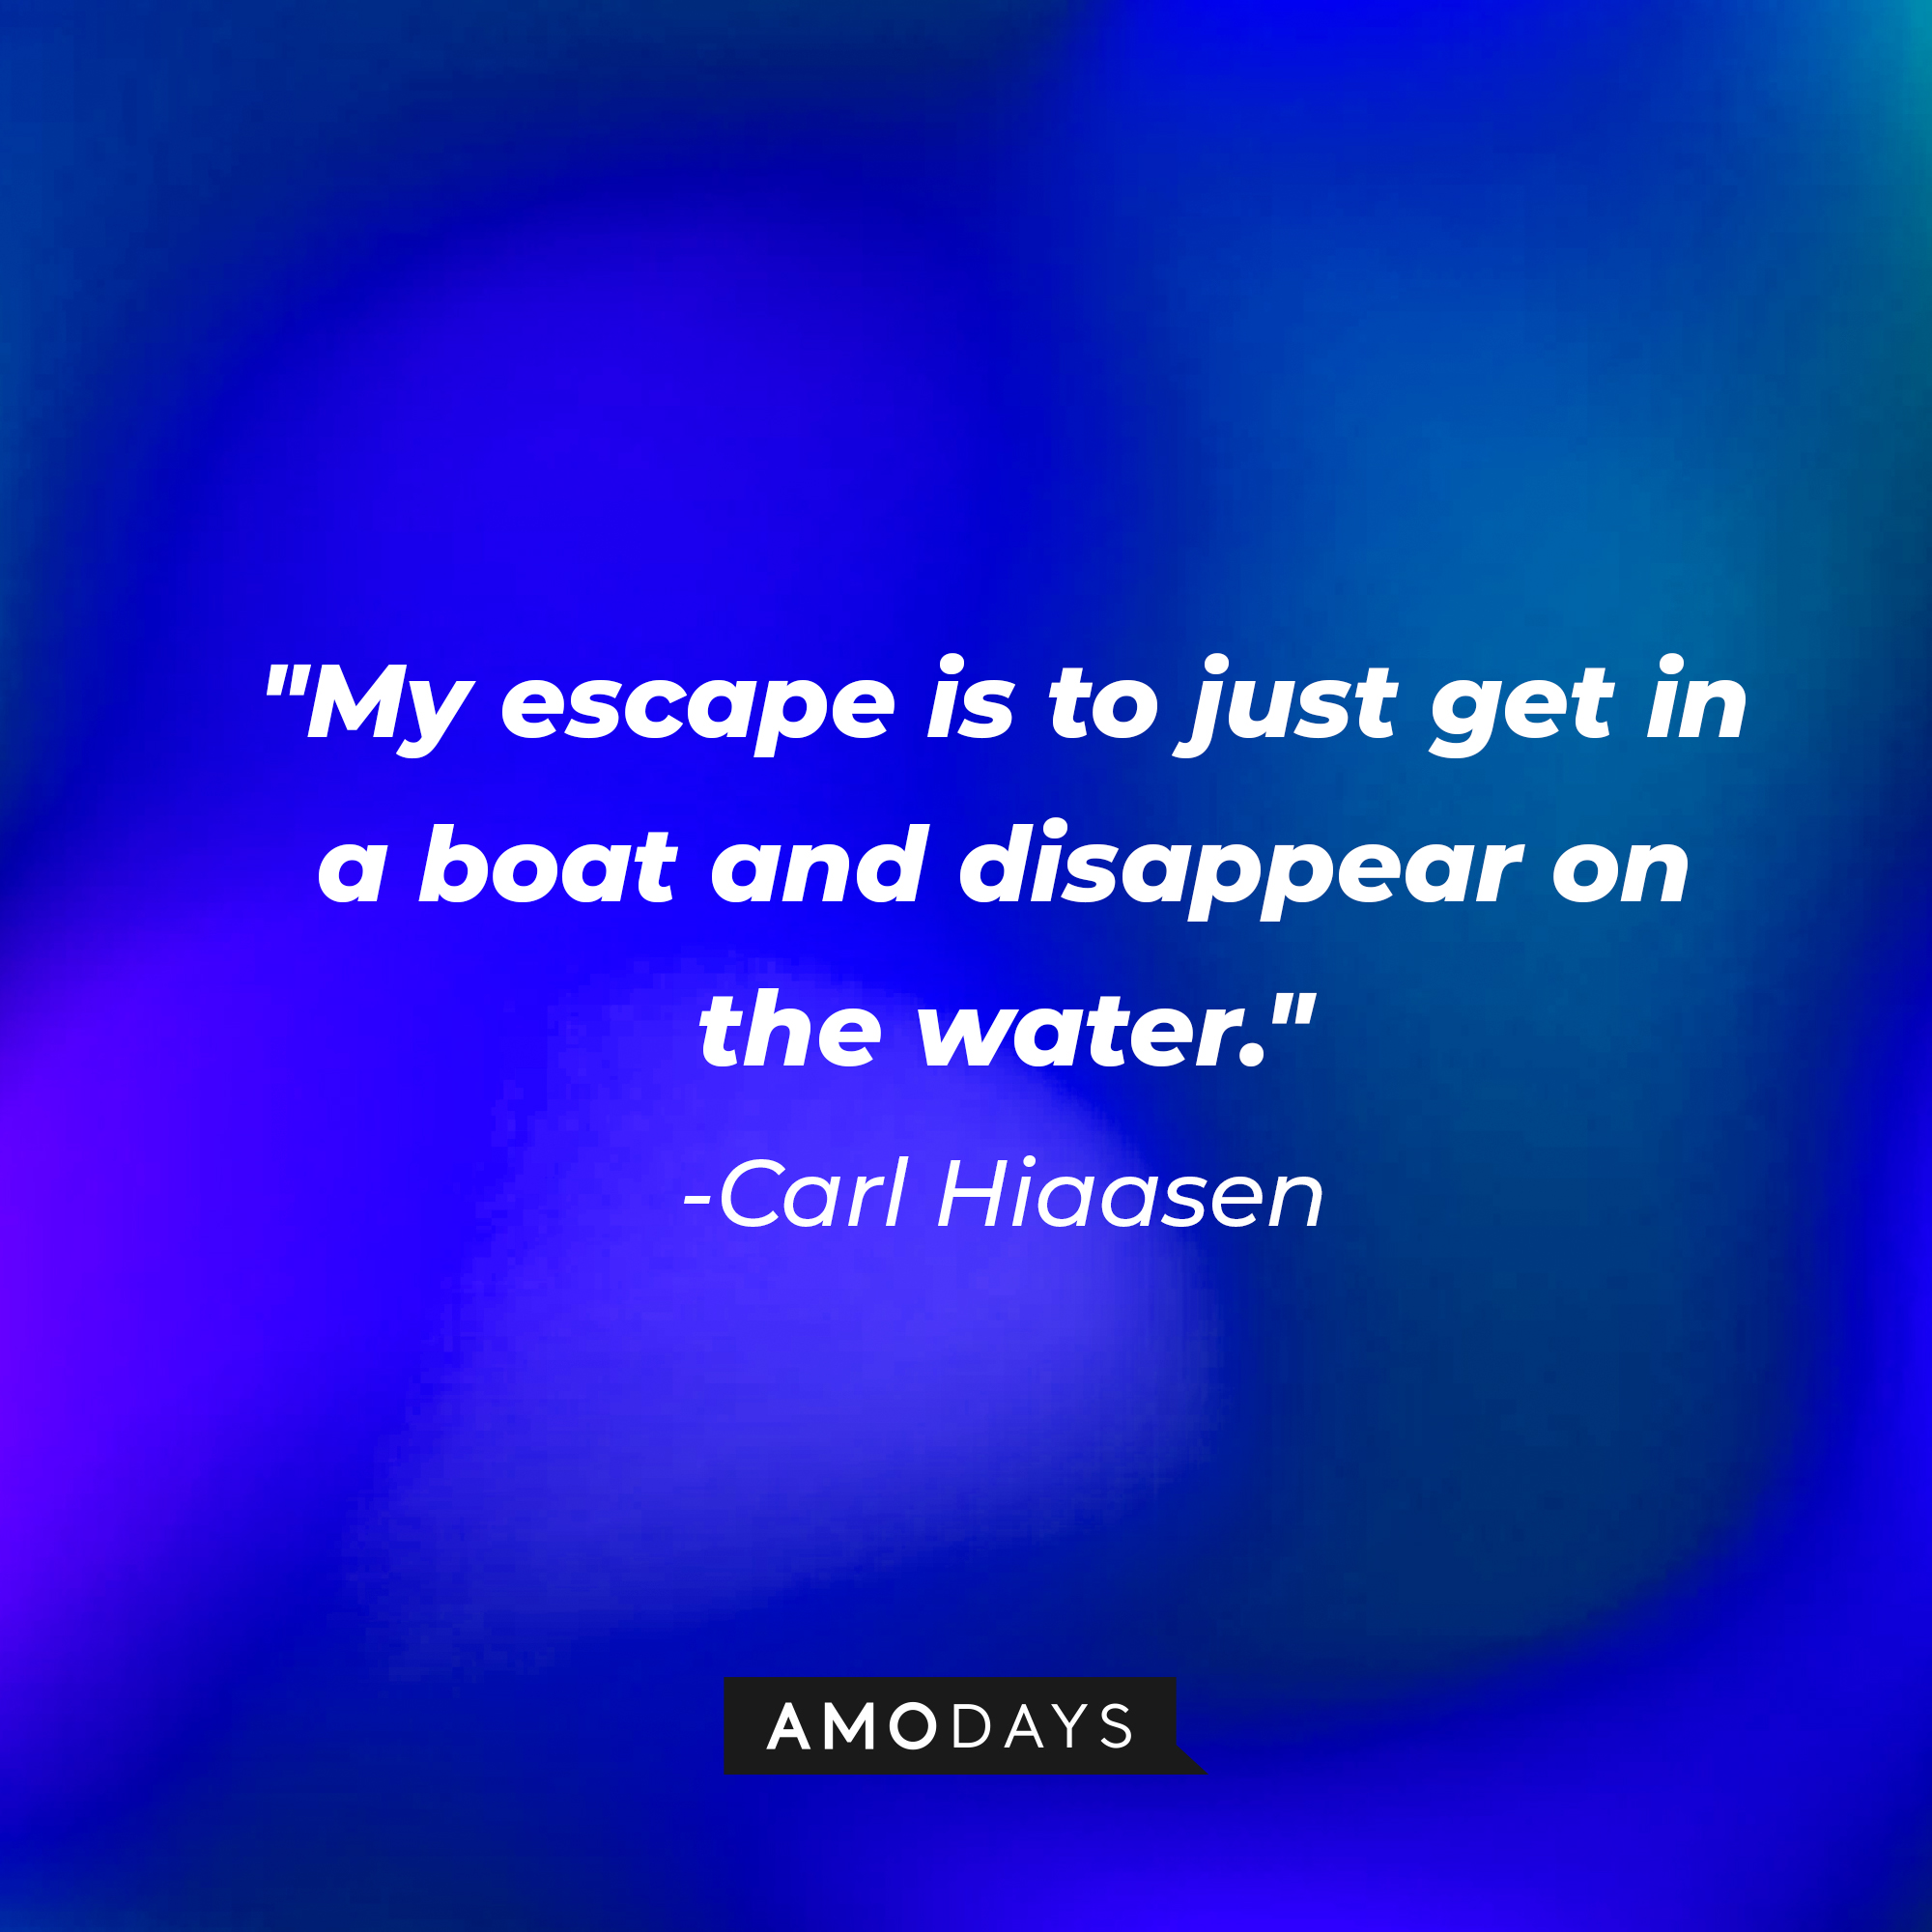 Carl Hiaasen's quote: "My escape is to just get in a boat and disappear on the water." | Image: AmoDays